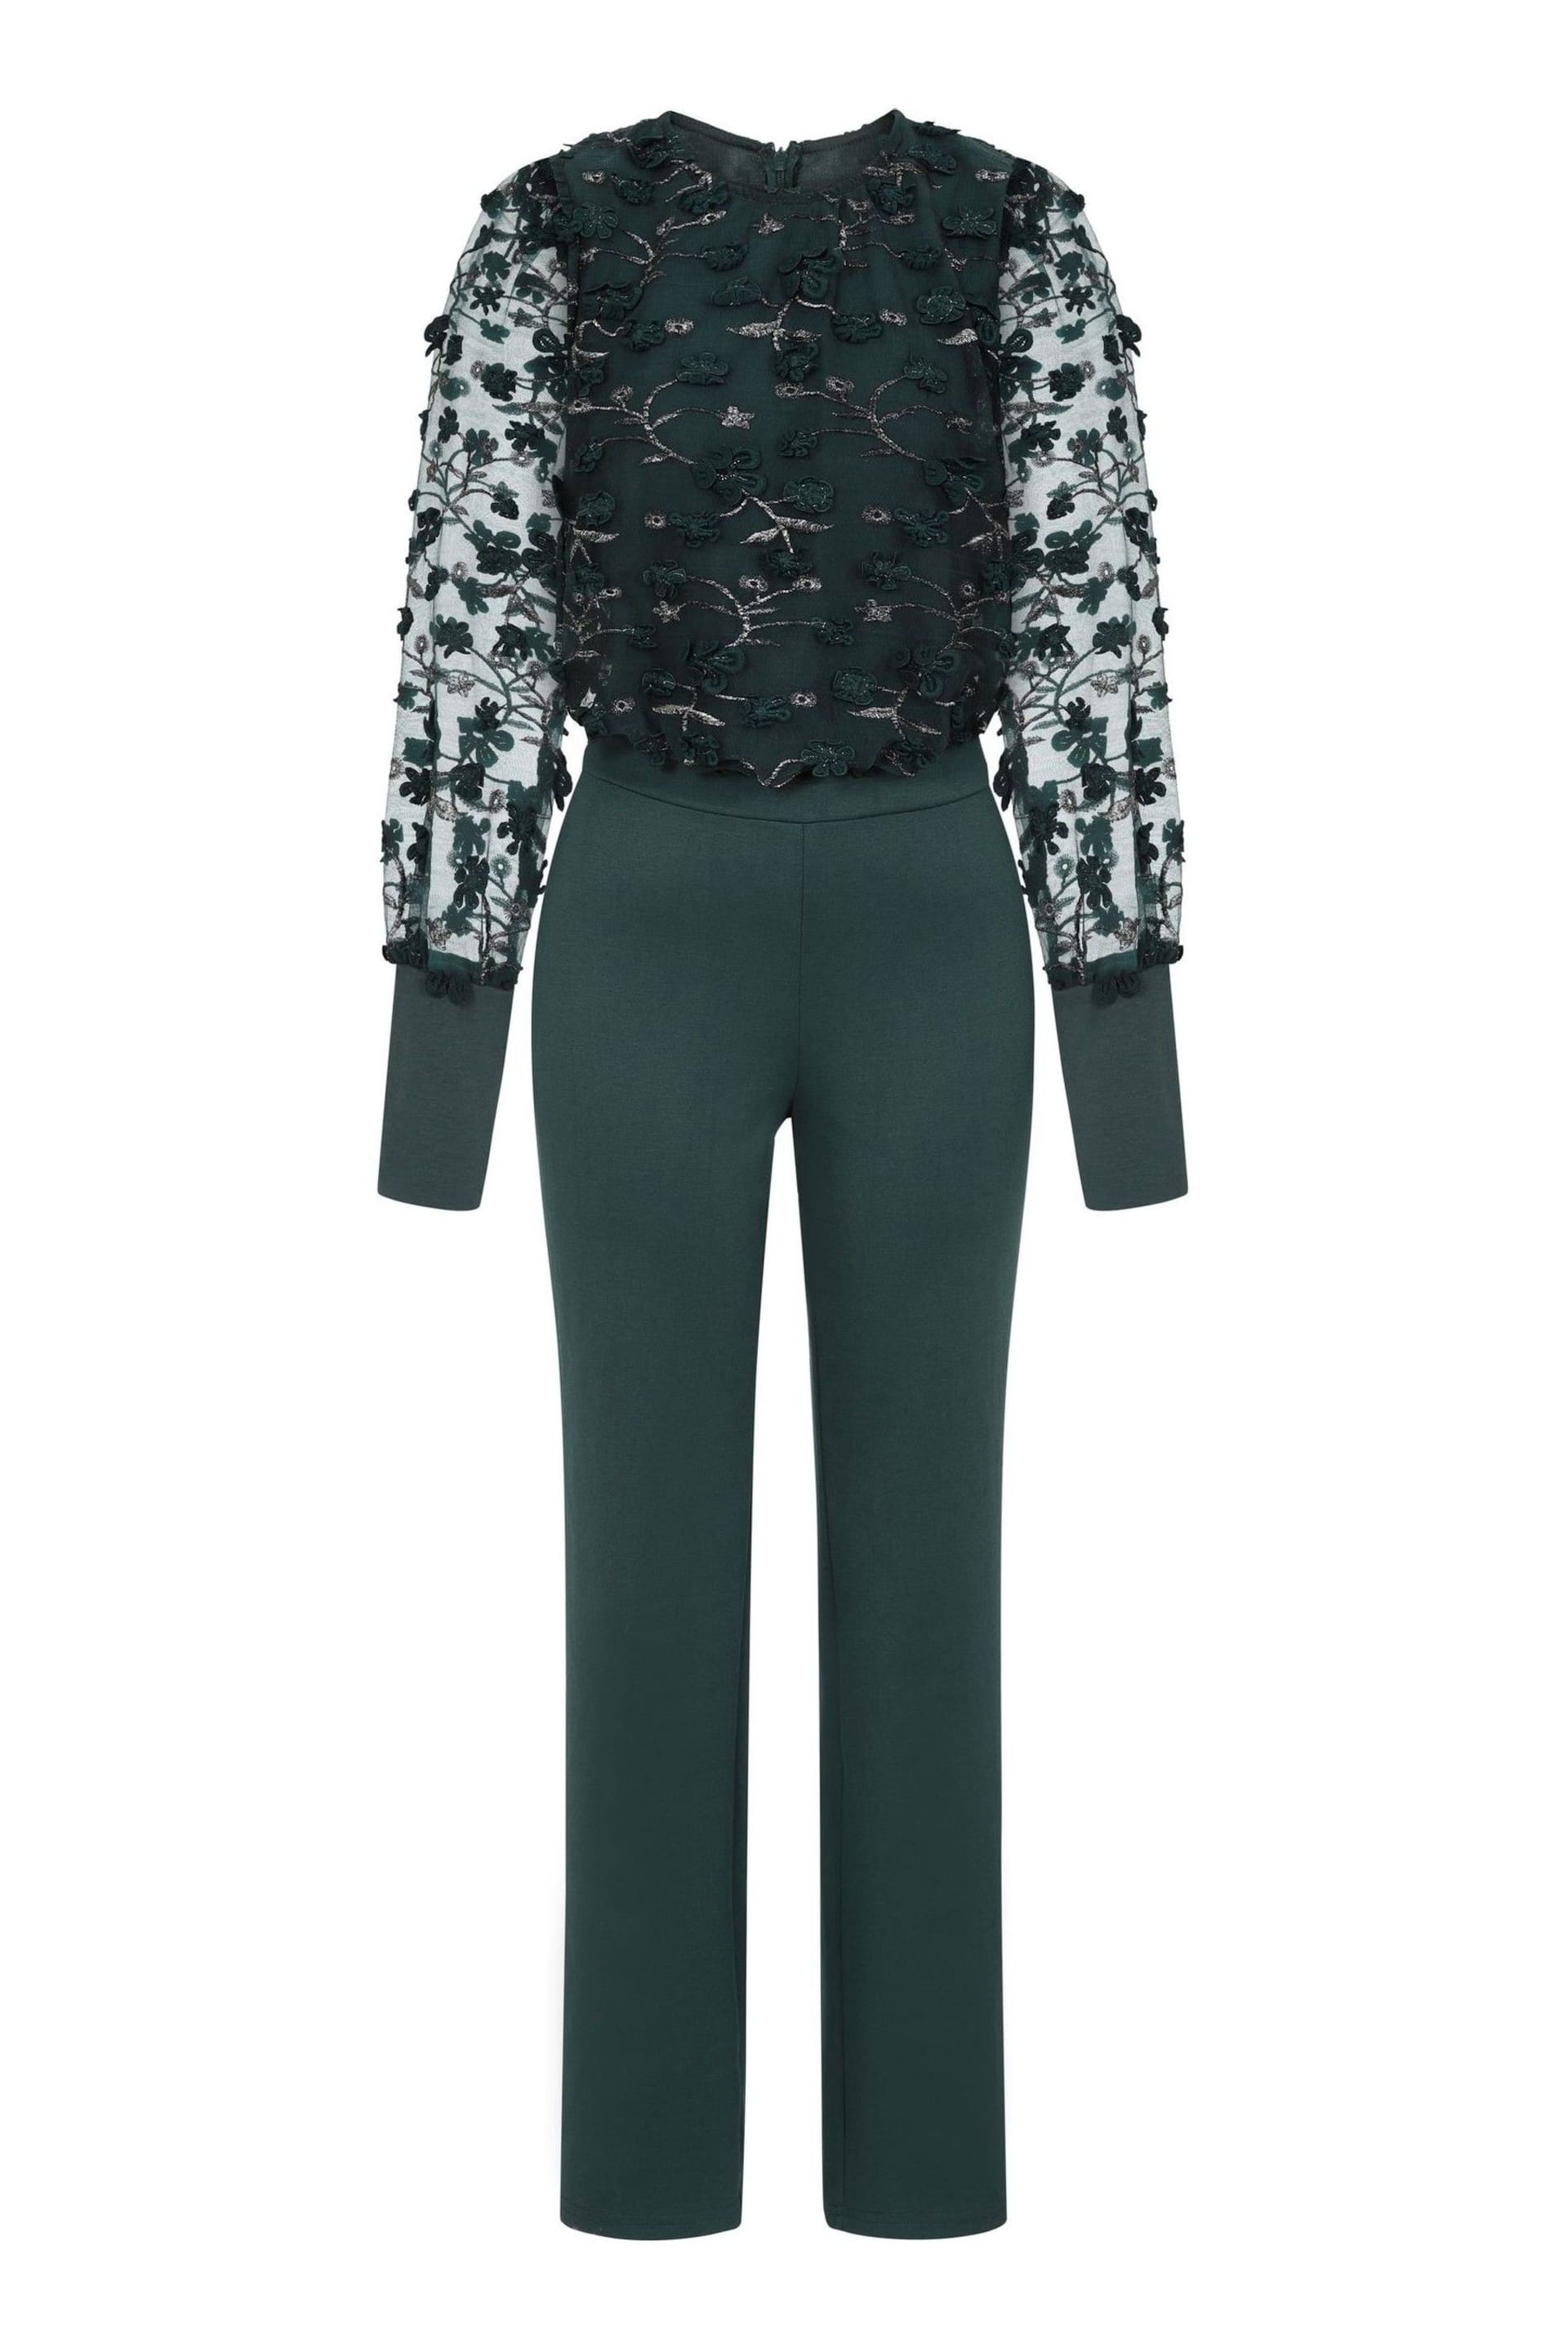 Hot Squash Green Ponte Jumpsuit with Blouson Sleeves - Image 3 of 3